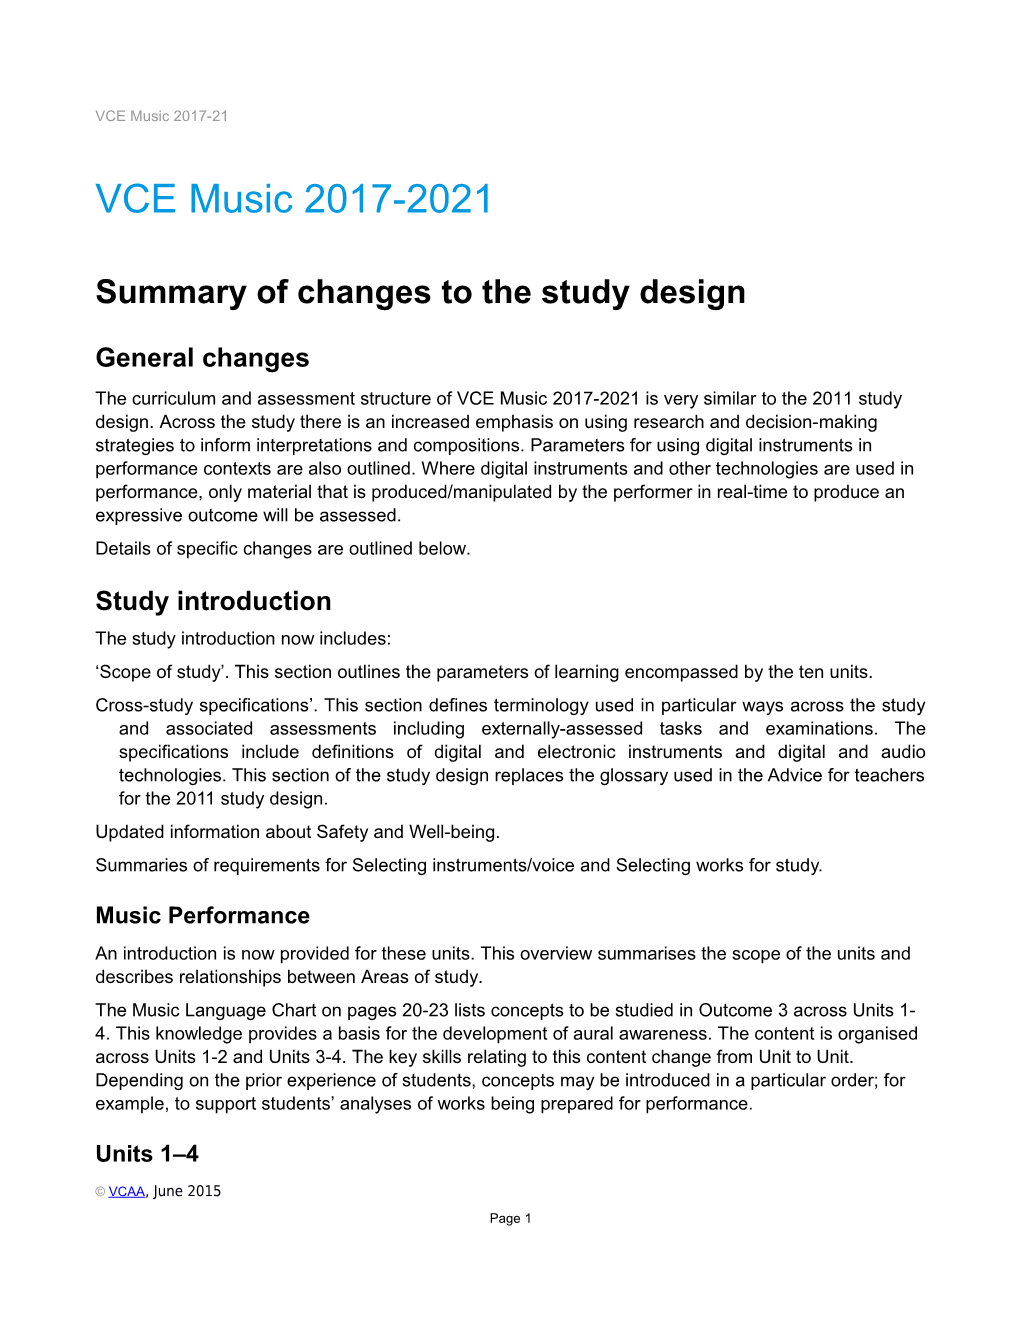 VCE Music - Summary of Changes